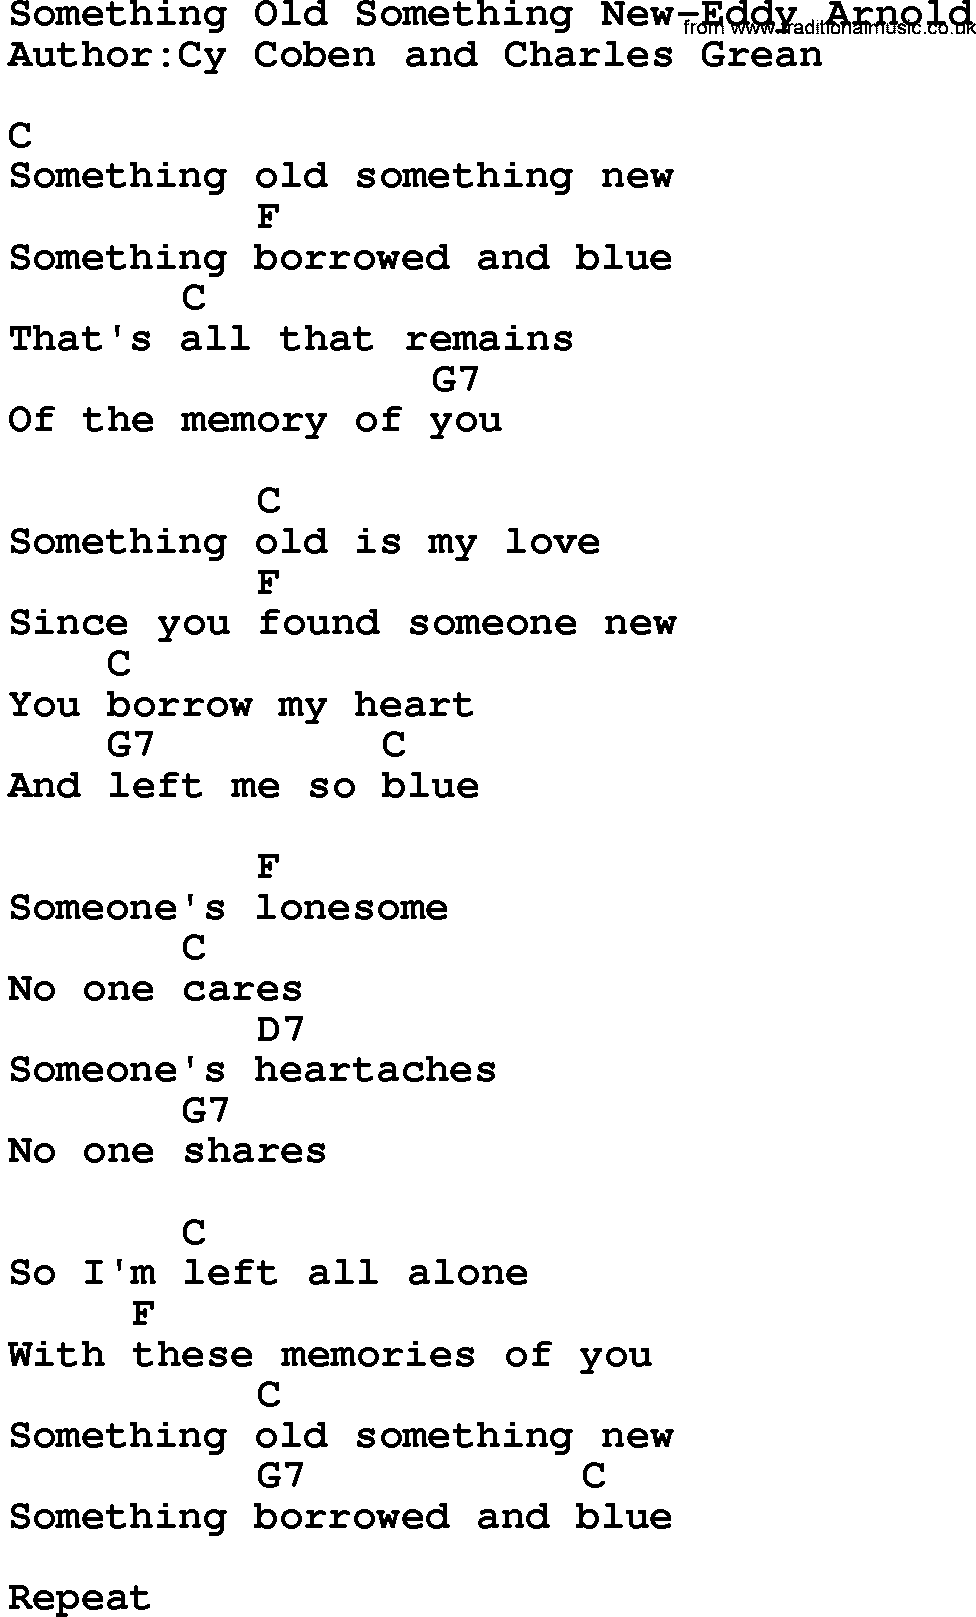 Country music song: Something Old Something New-Eddy Arnold lyrics and chords